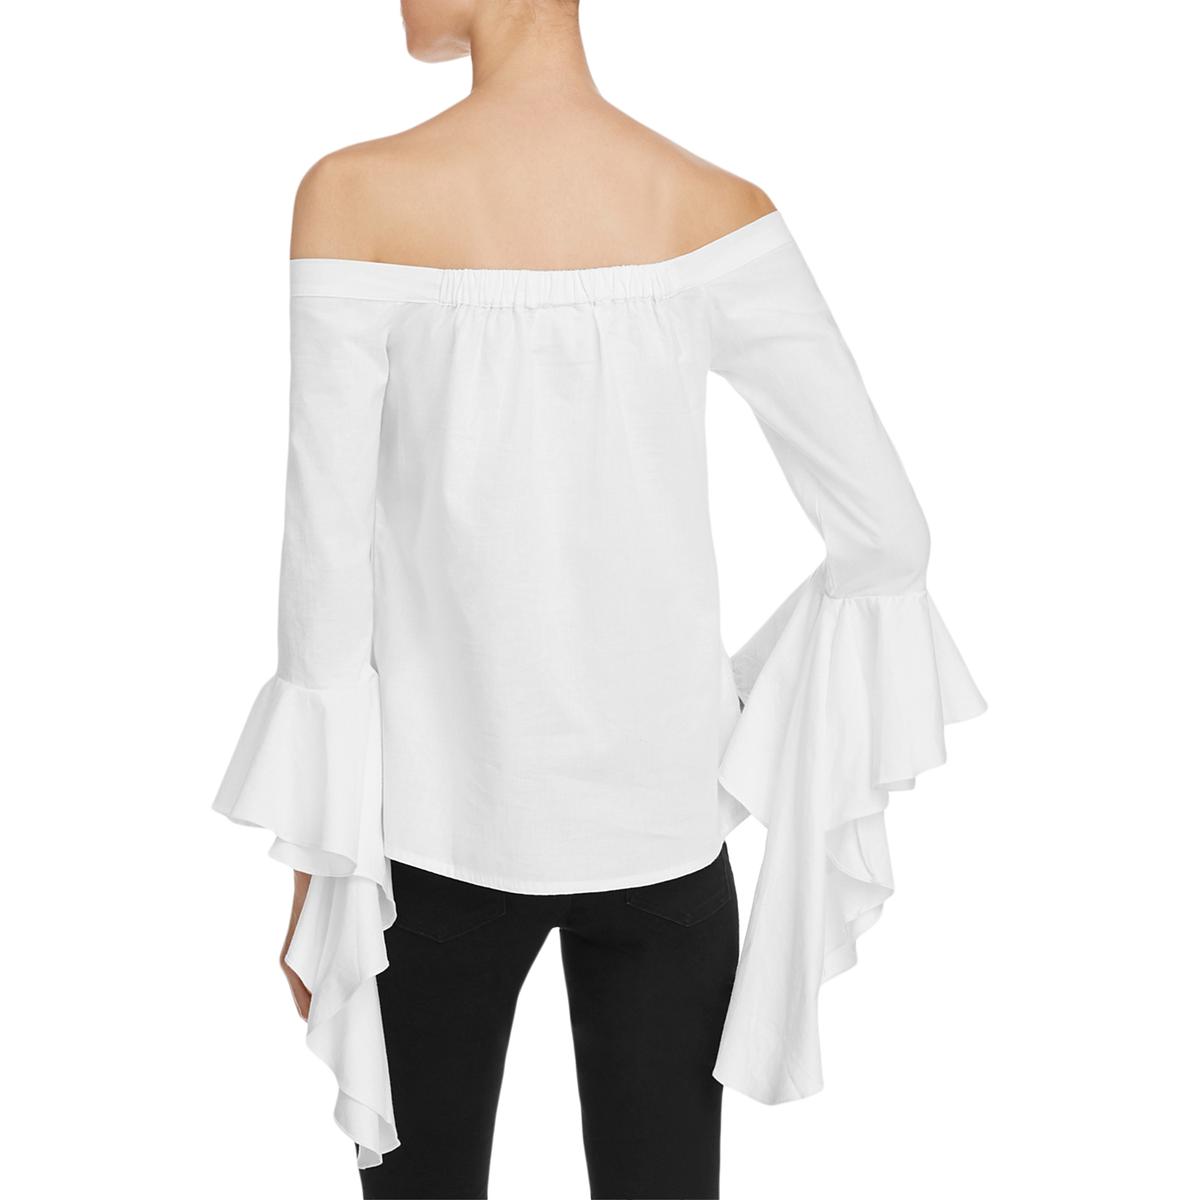 MLM Womens White Off-The-Shoulder Bell Sleeves Dress Blouse Top XS BHFO ...